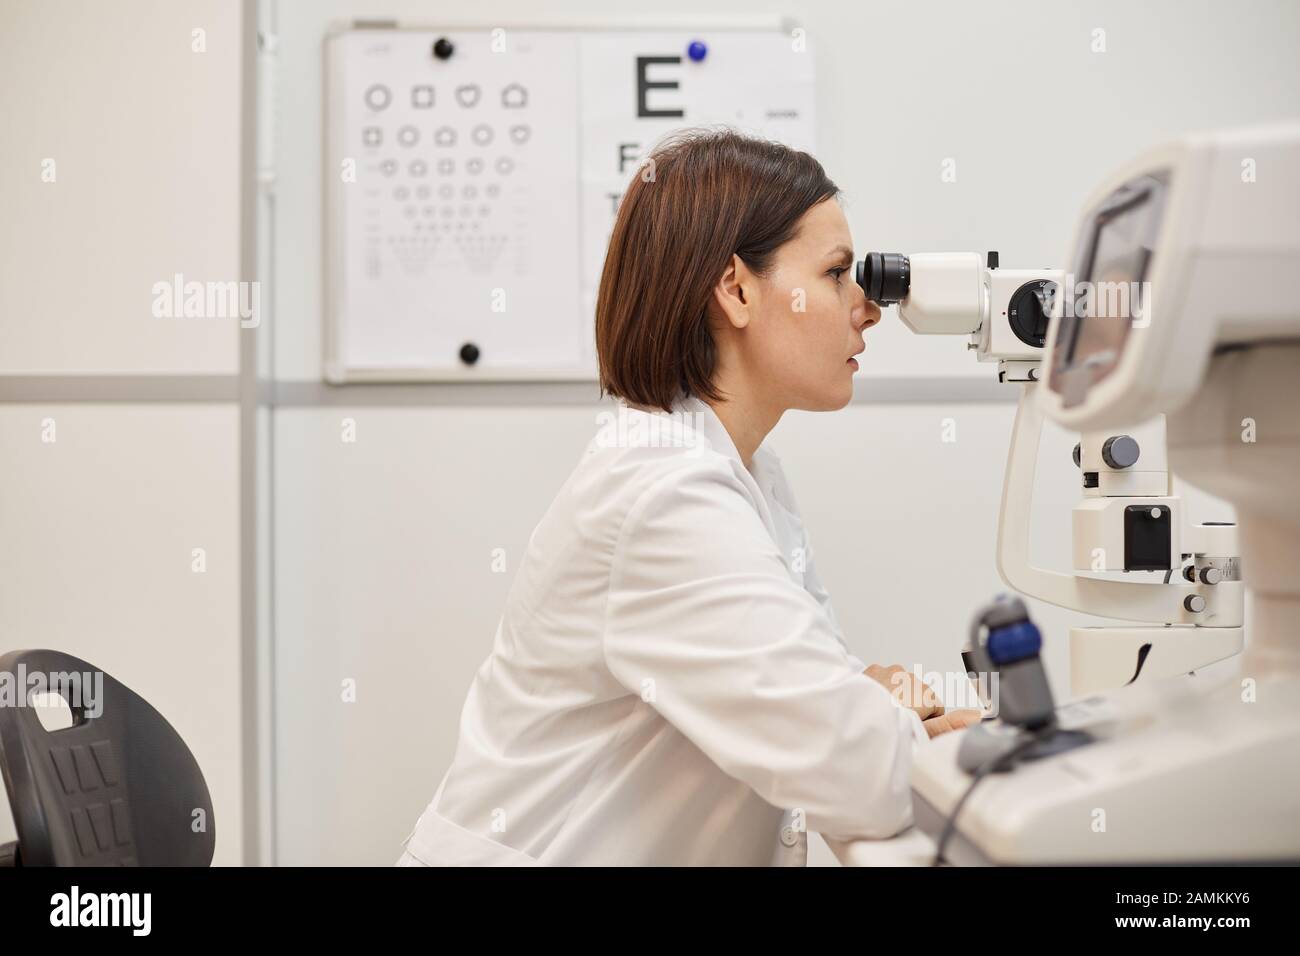 Side view portrait of young female ophthalmologist using refractometer machine during vision test in modern clinic, copy space Stock Photo